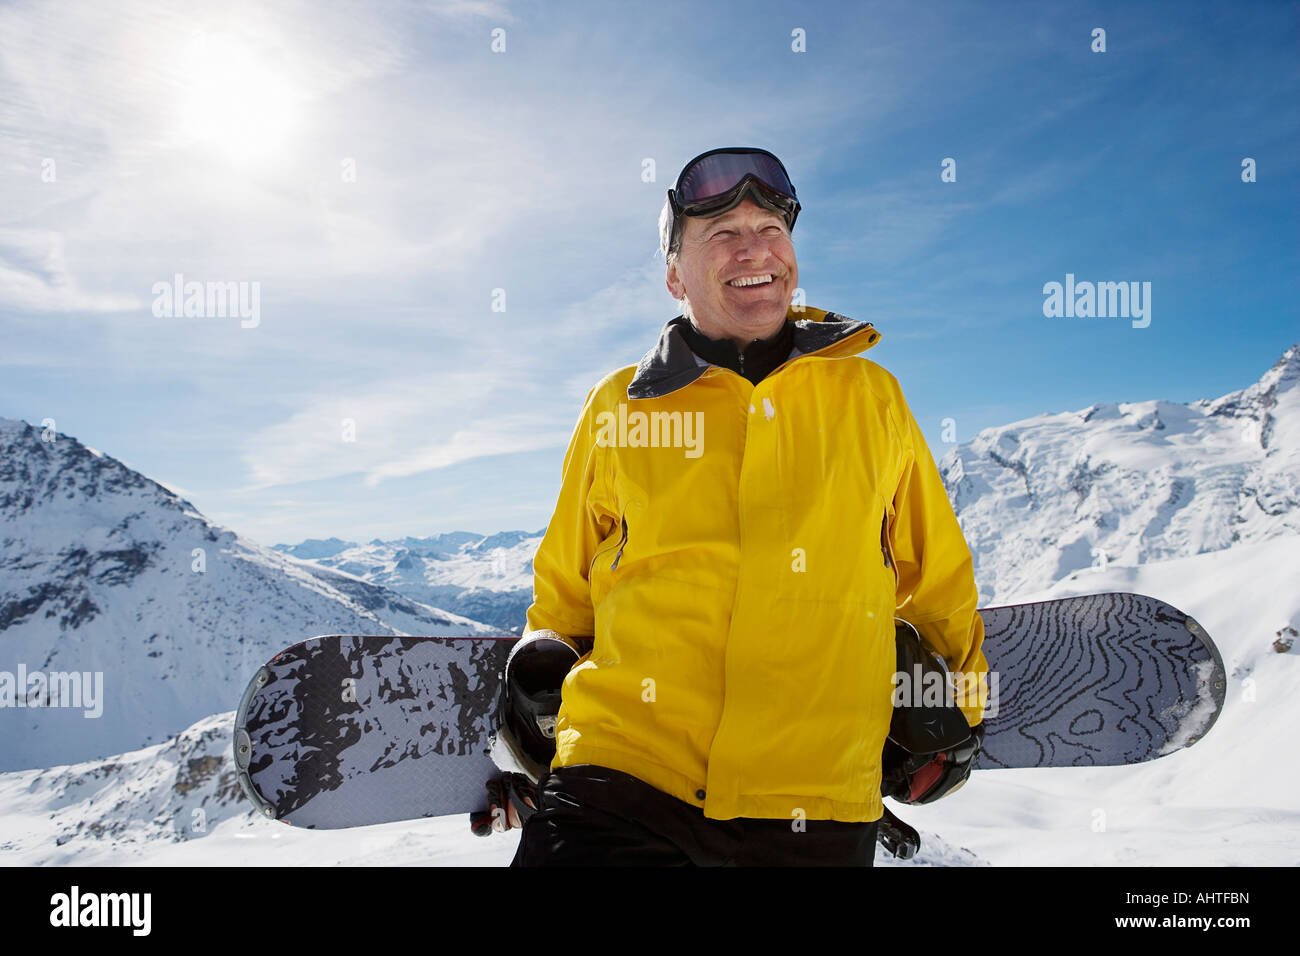 Mature male snowboarder with snowboard on mountain, portrait Stock Photo